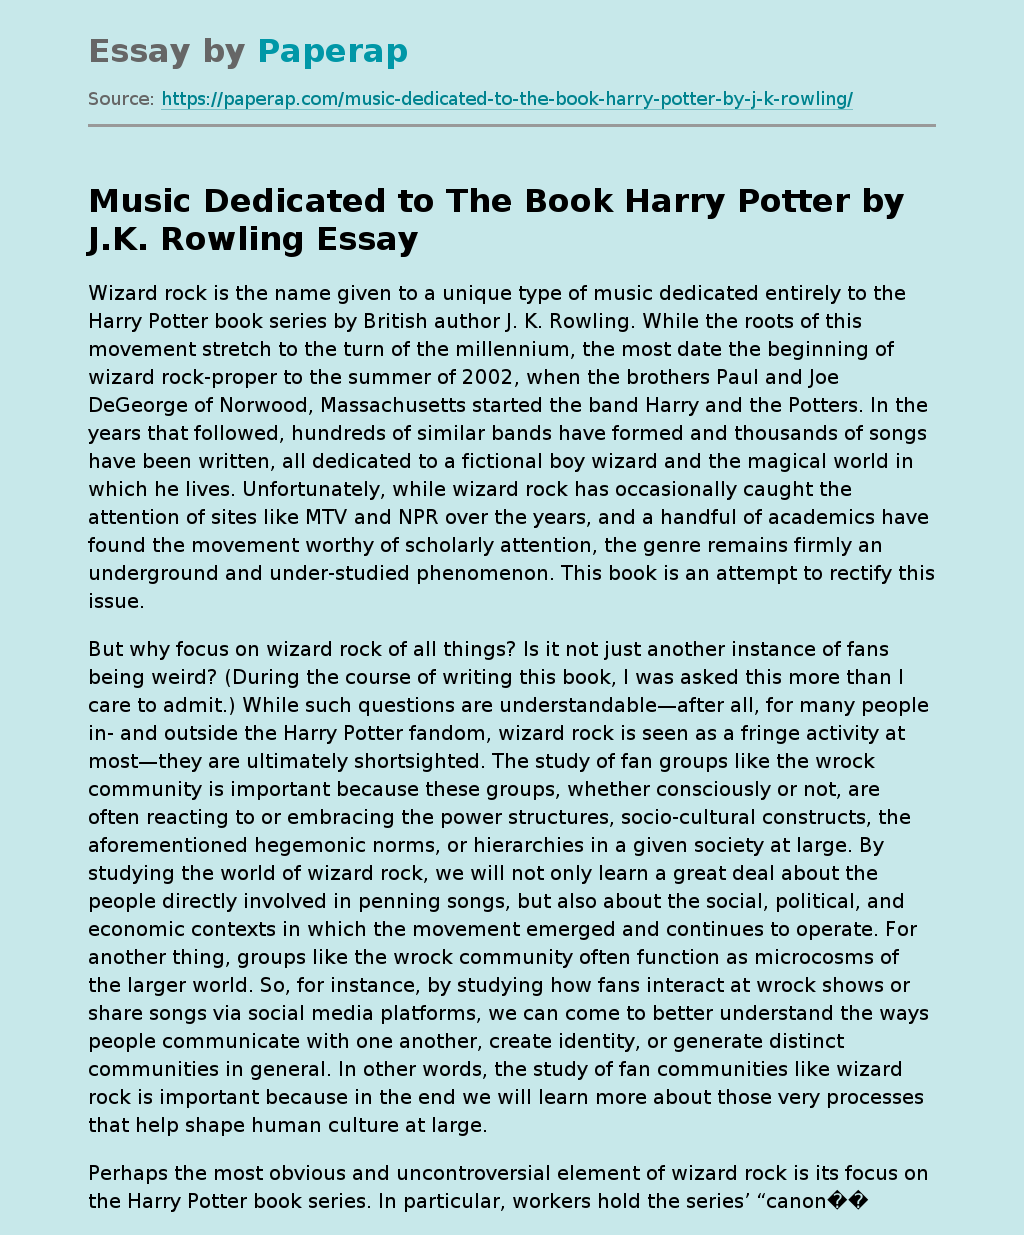 Music Dedicated to The Book Harry Potter by J.K. Rowling